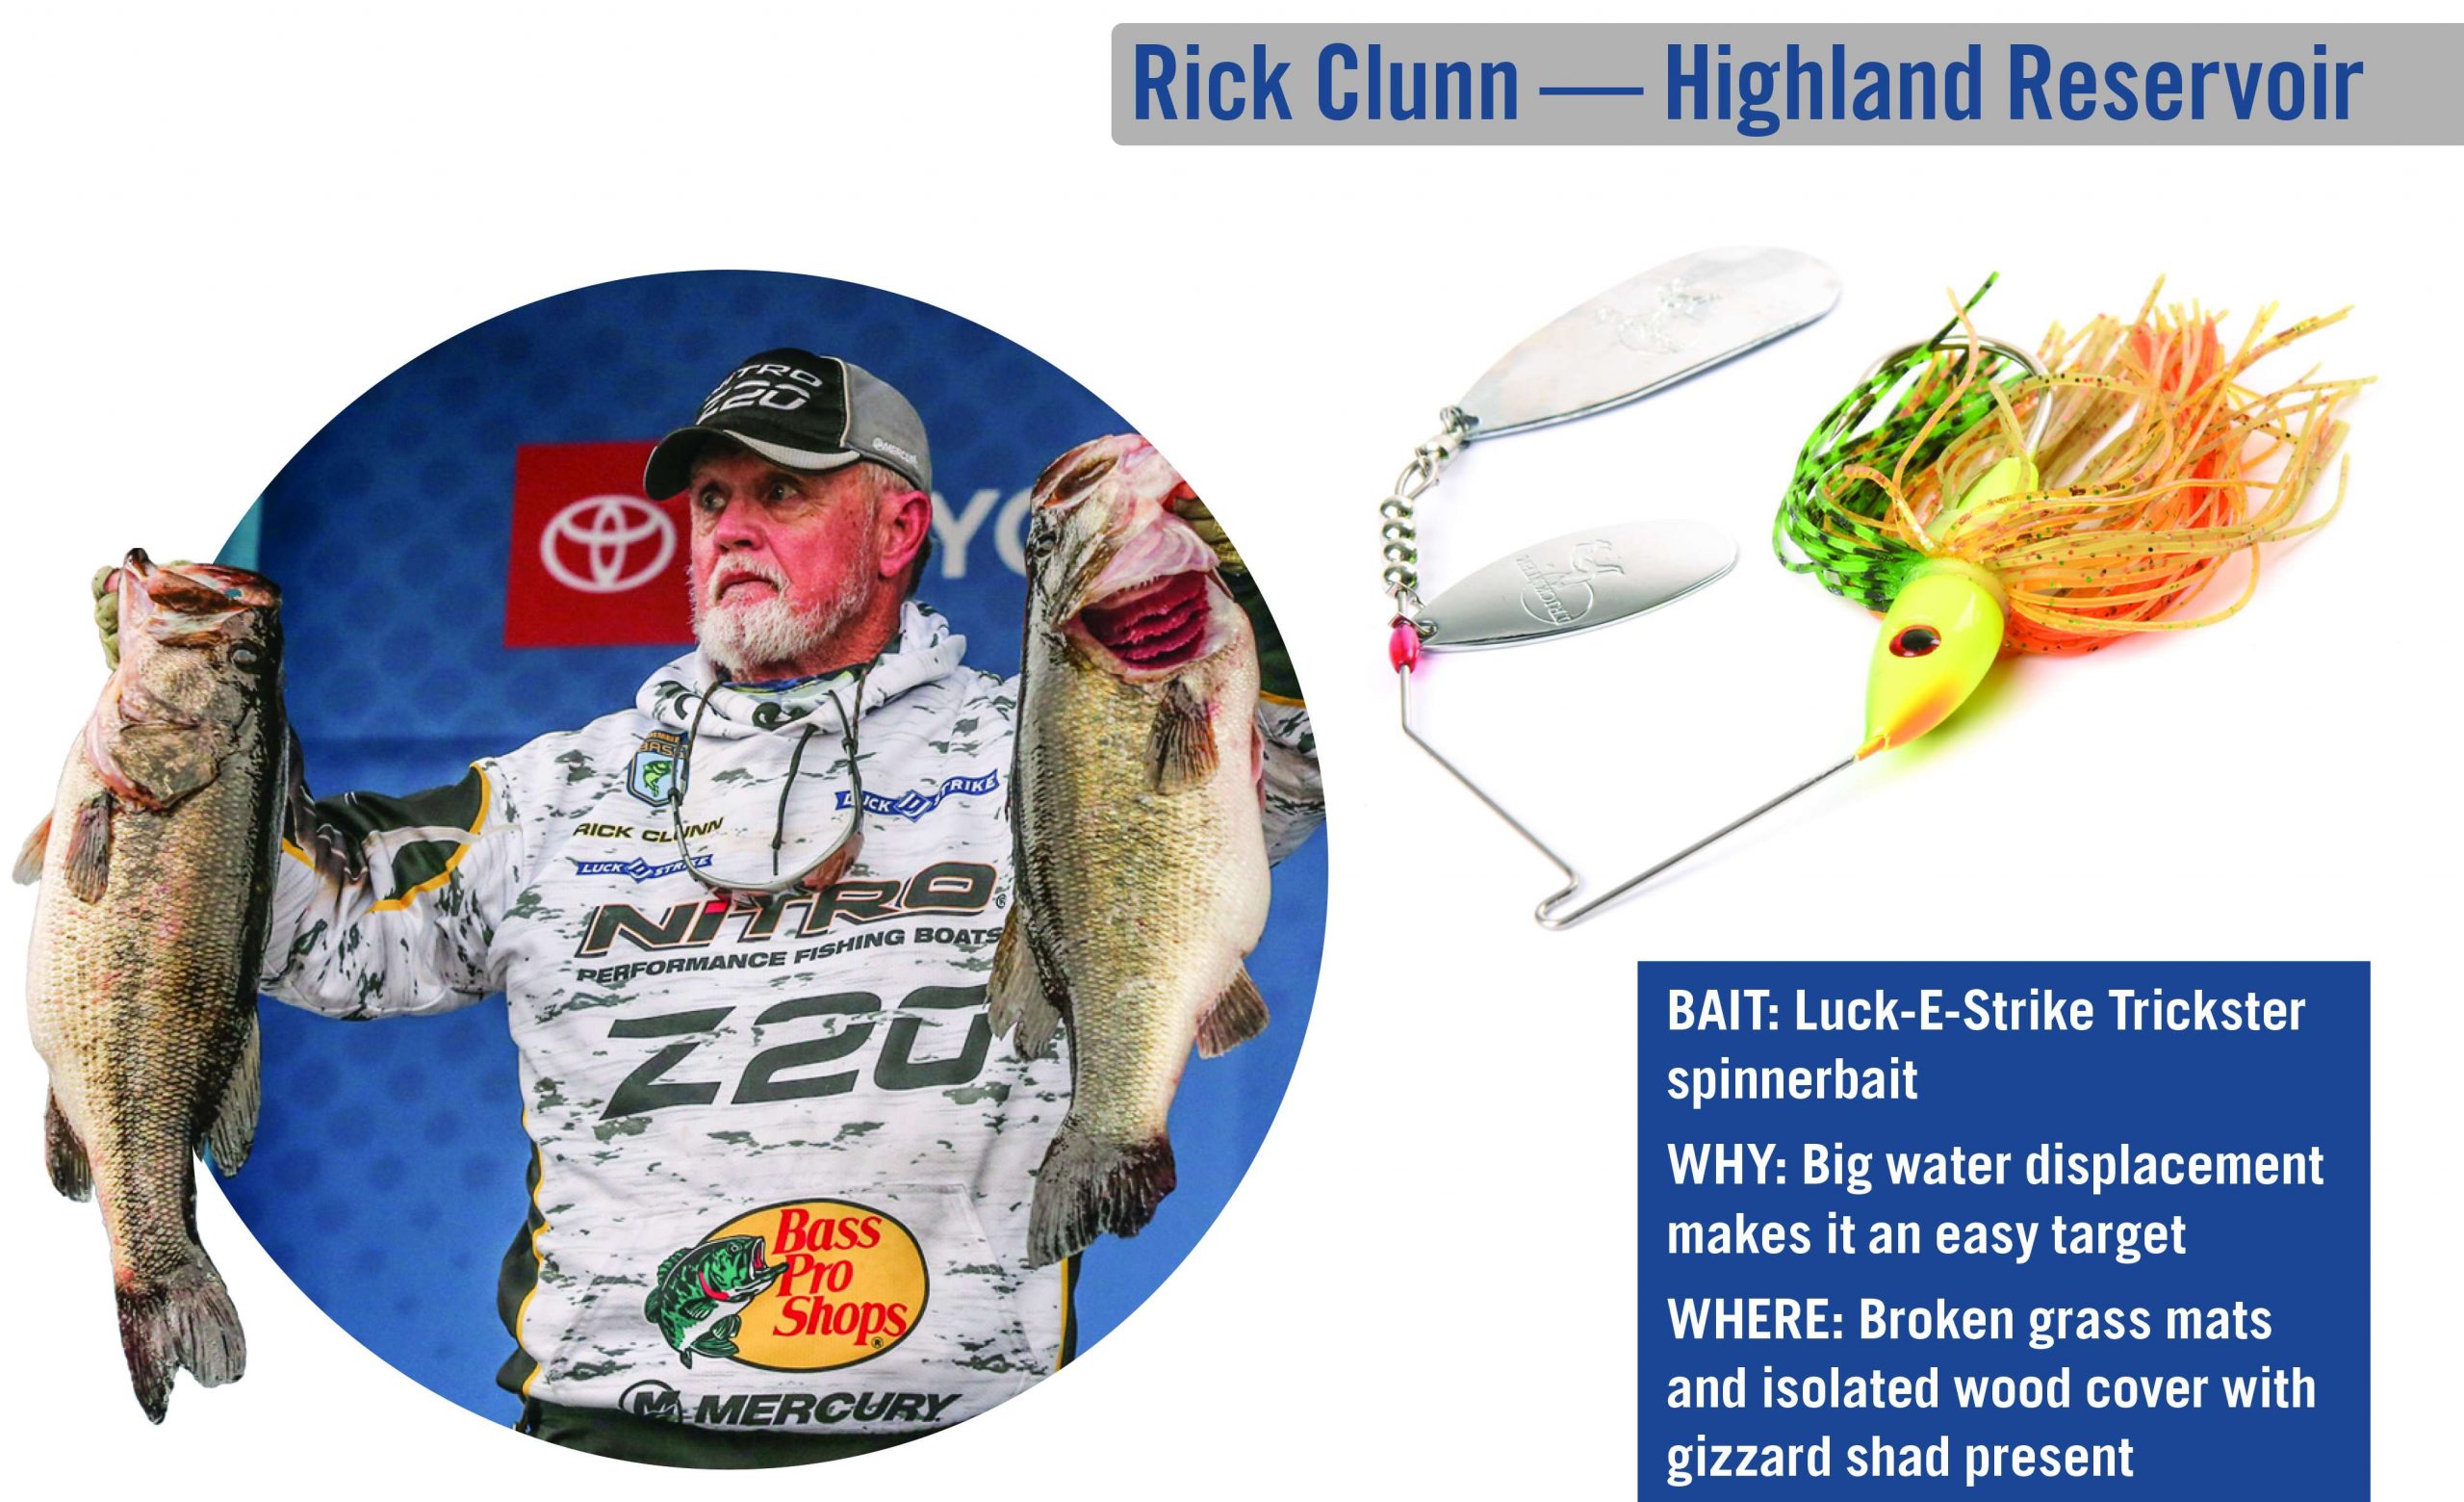 Land of giants: The hunt for fall studs - Bassmaster